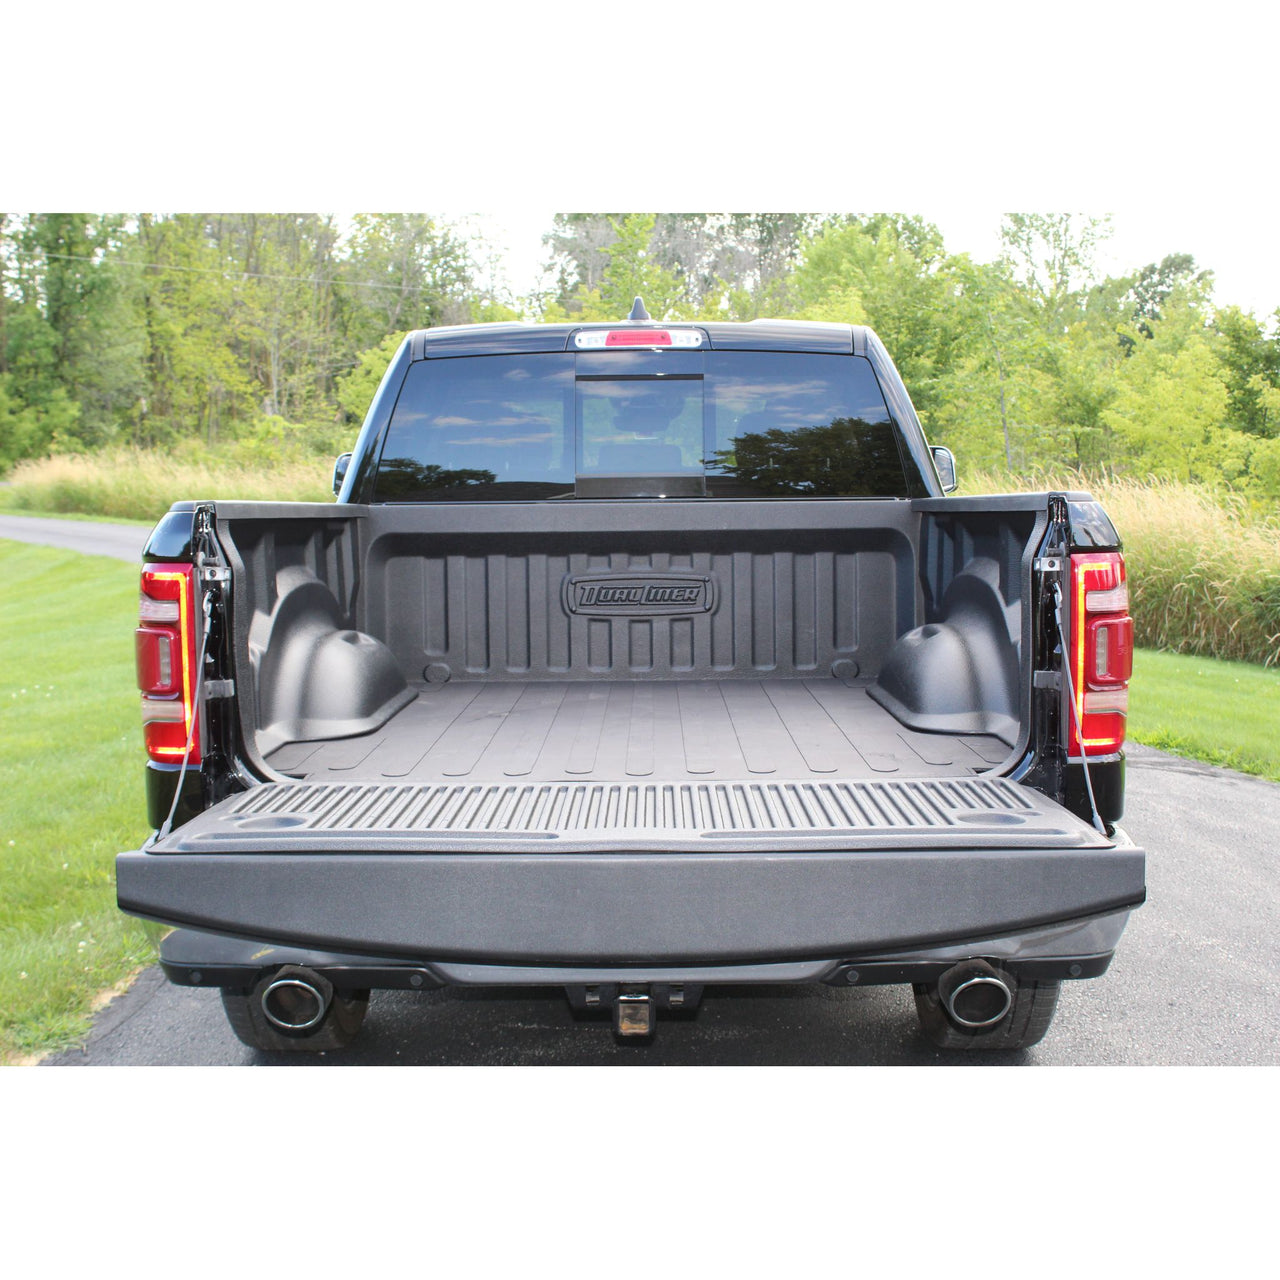 DualLiner 2019 to 2022 "New Body" Ram 1500 ONLY (With Factory LED Lights) - Short 5'7" Bed